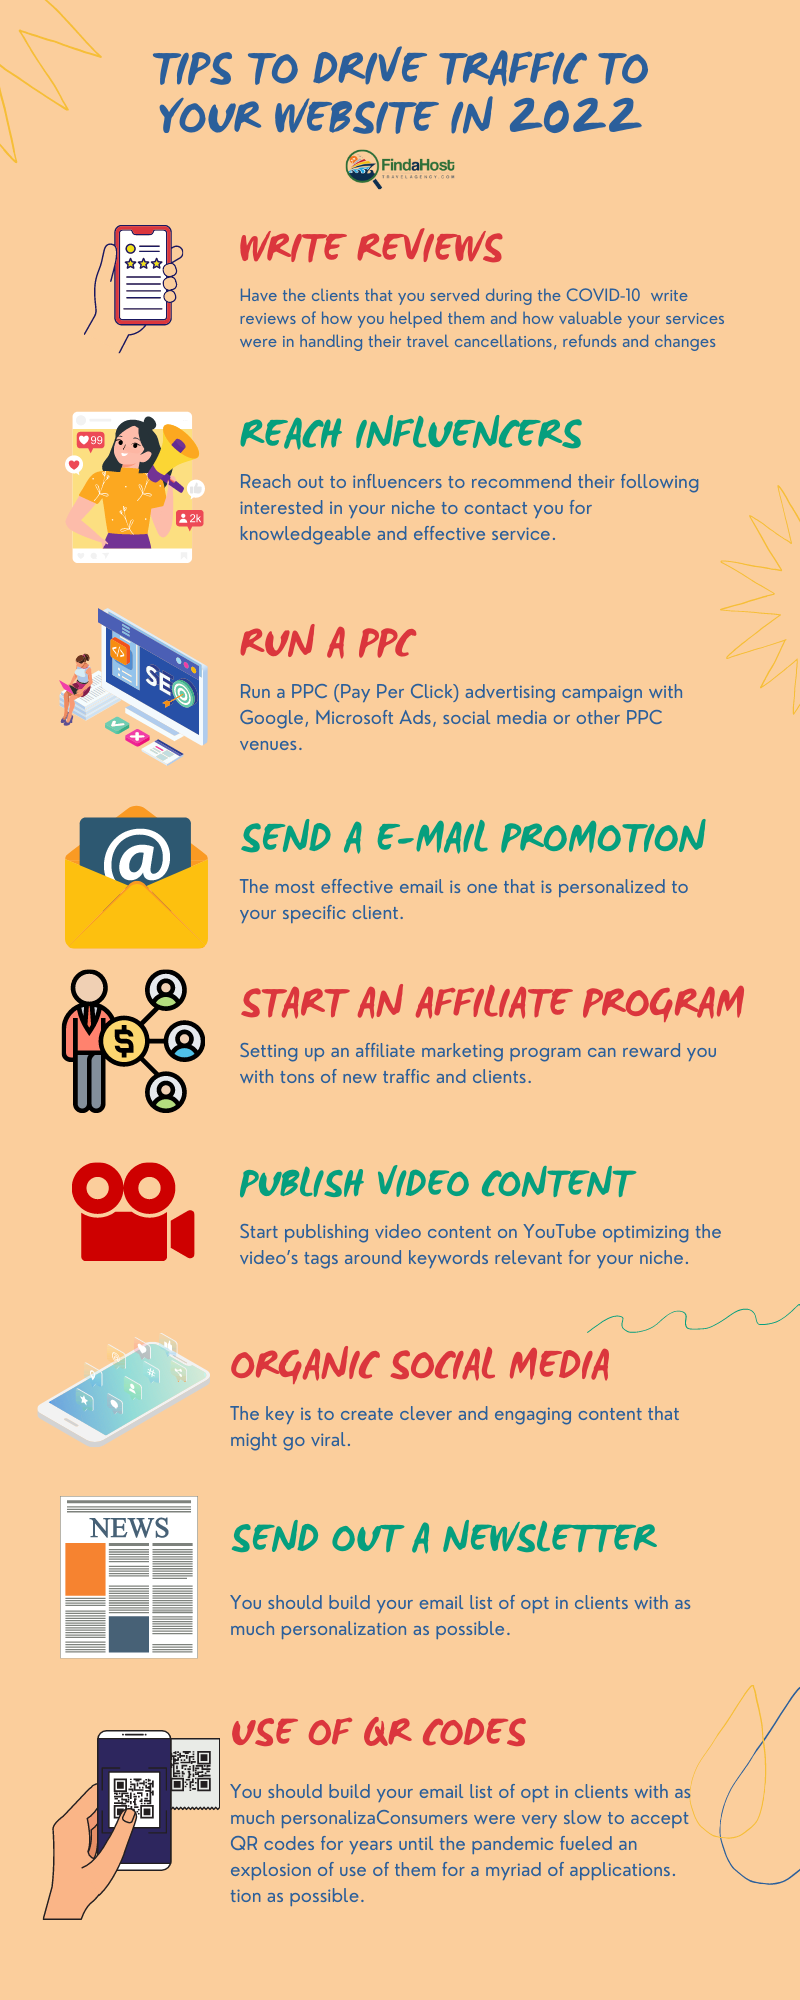 30 Tips to Drive Traffic to Your Website in 2022 Infographic 1 - FAHTA